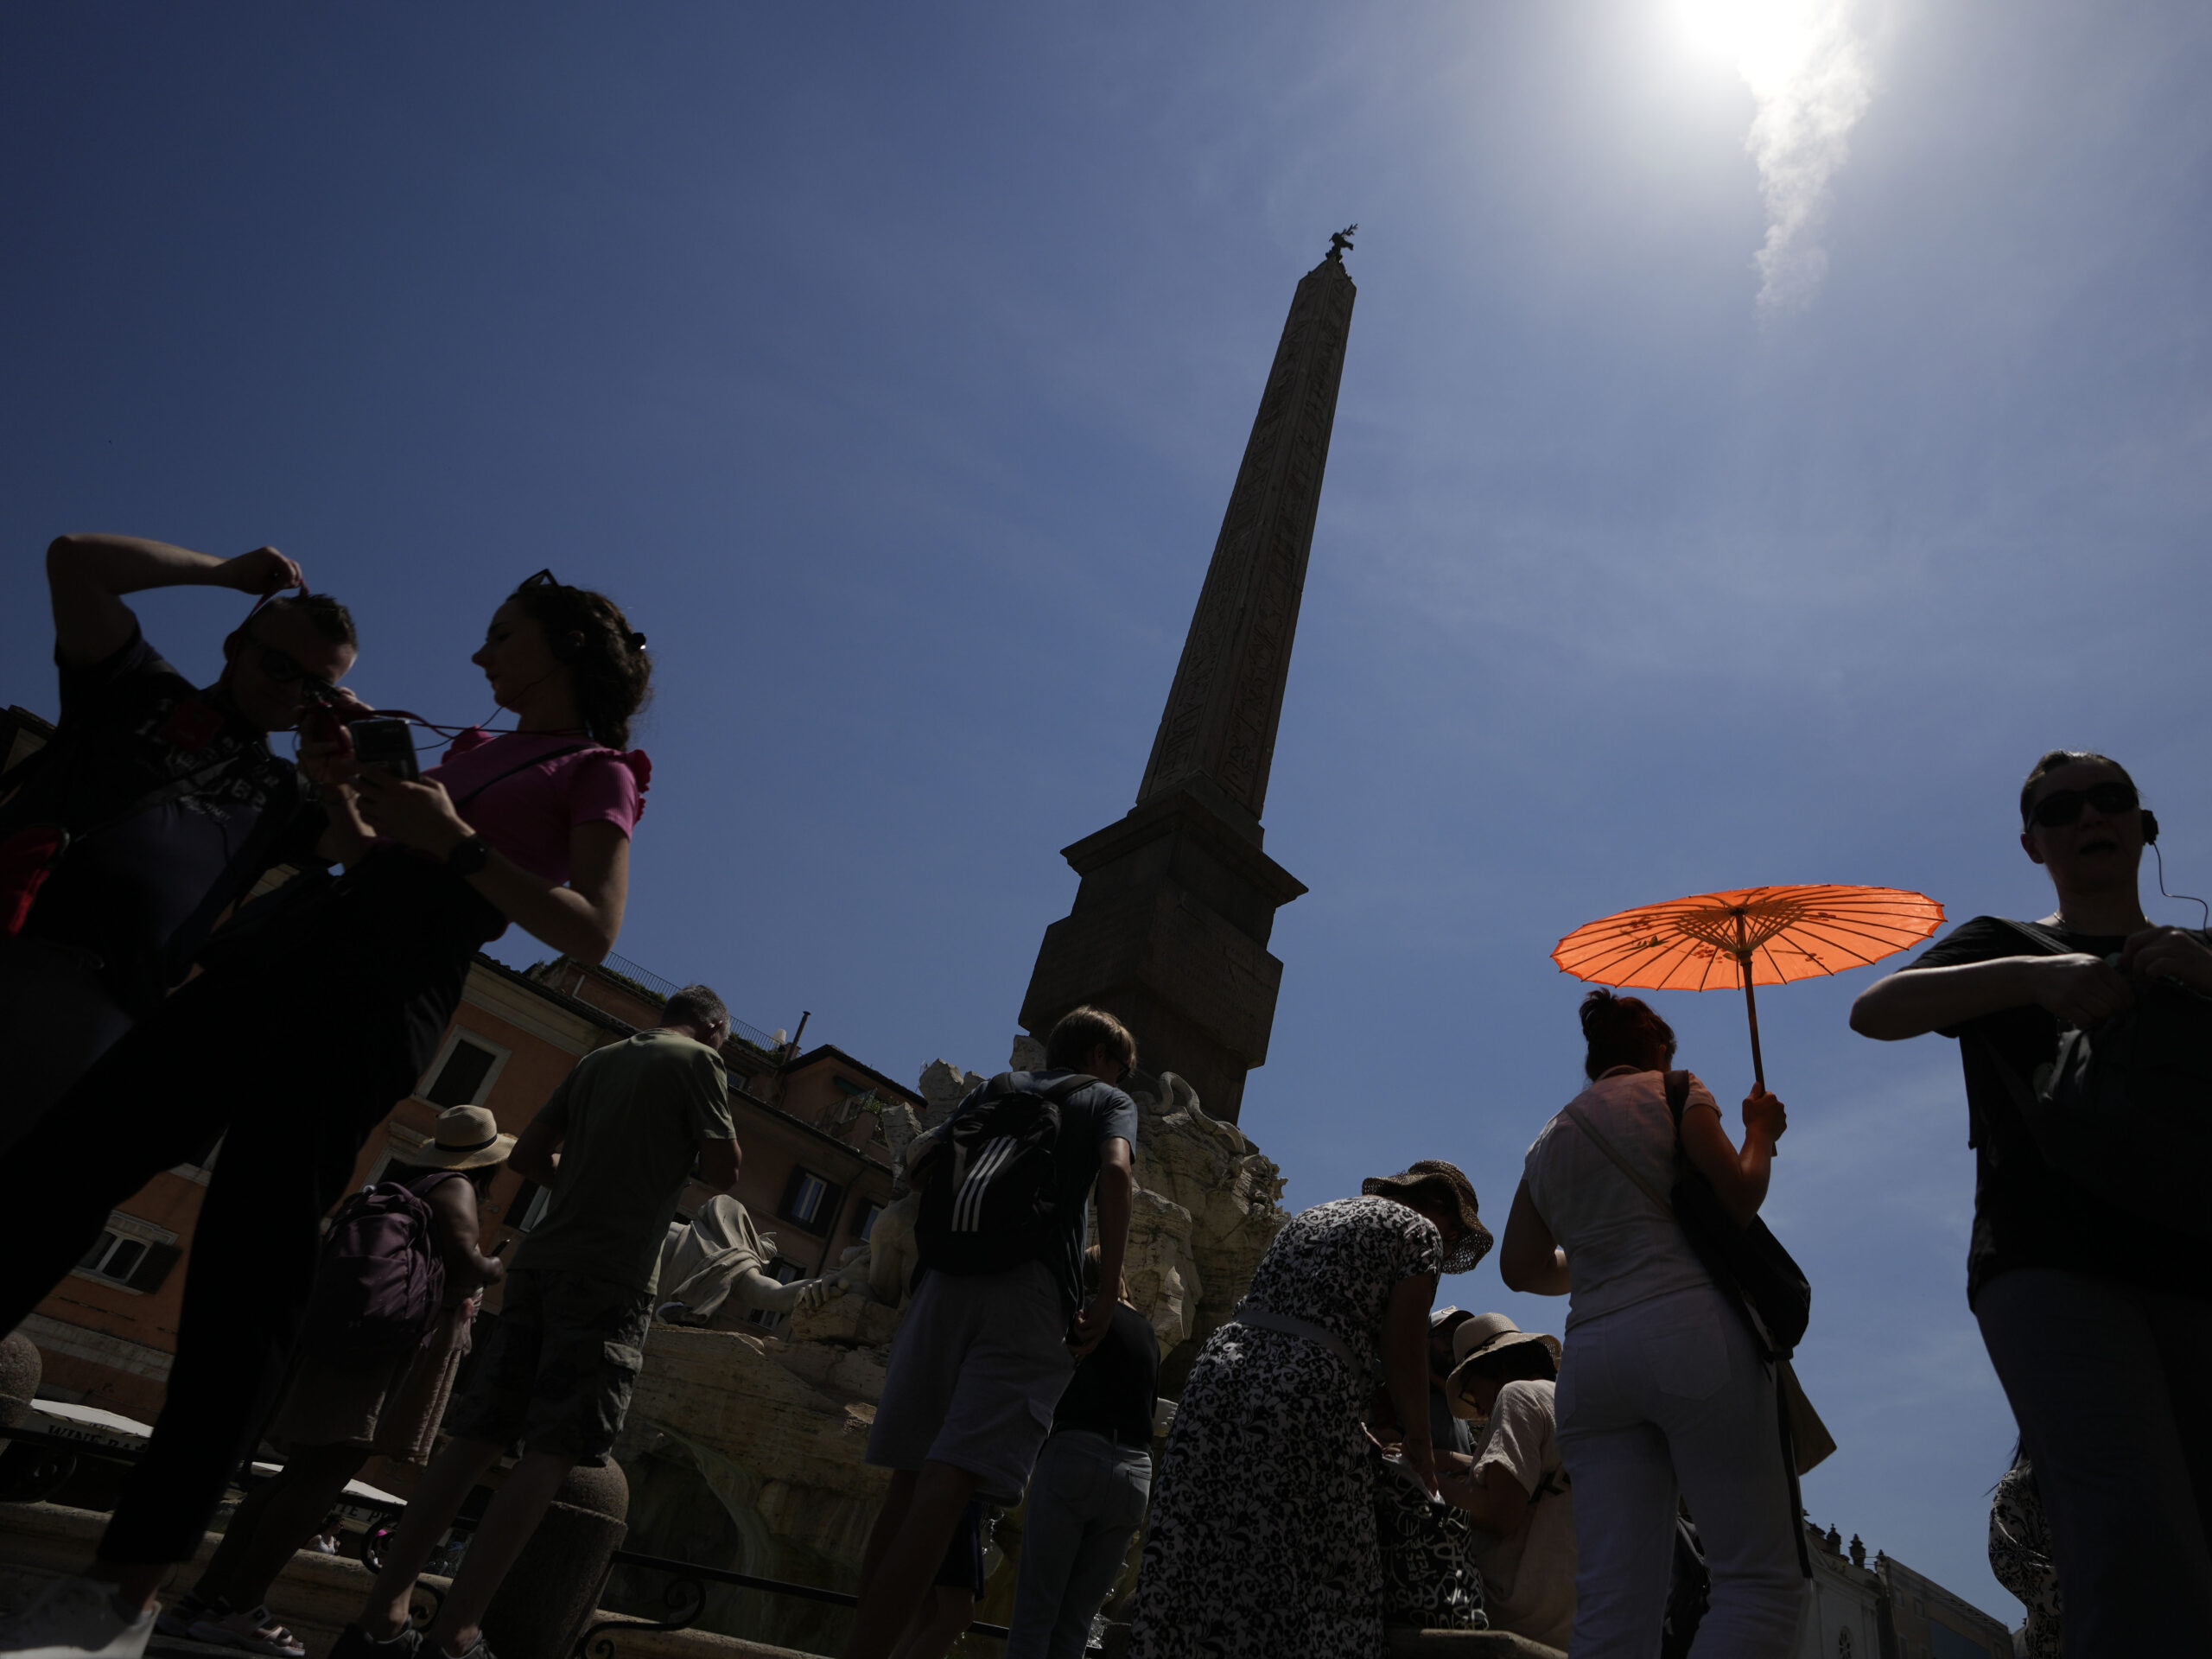 People in the streets of Rom in June 2022. Heat-related deaths in Europe have increased by about 30% in the last 20 years, according to a new report.